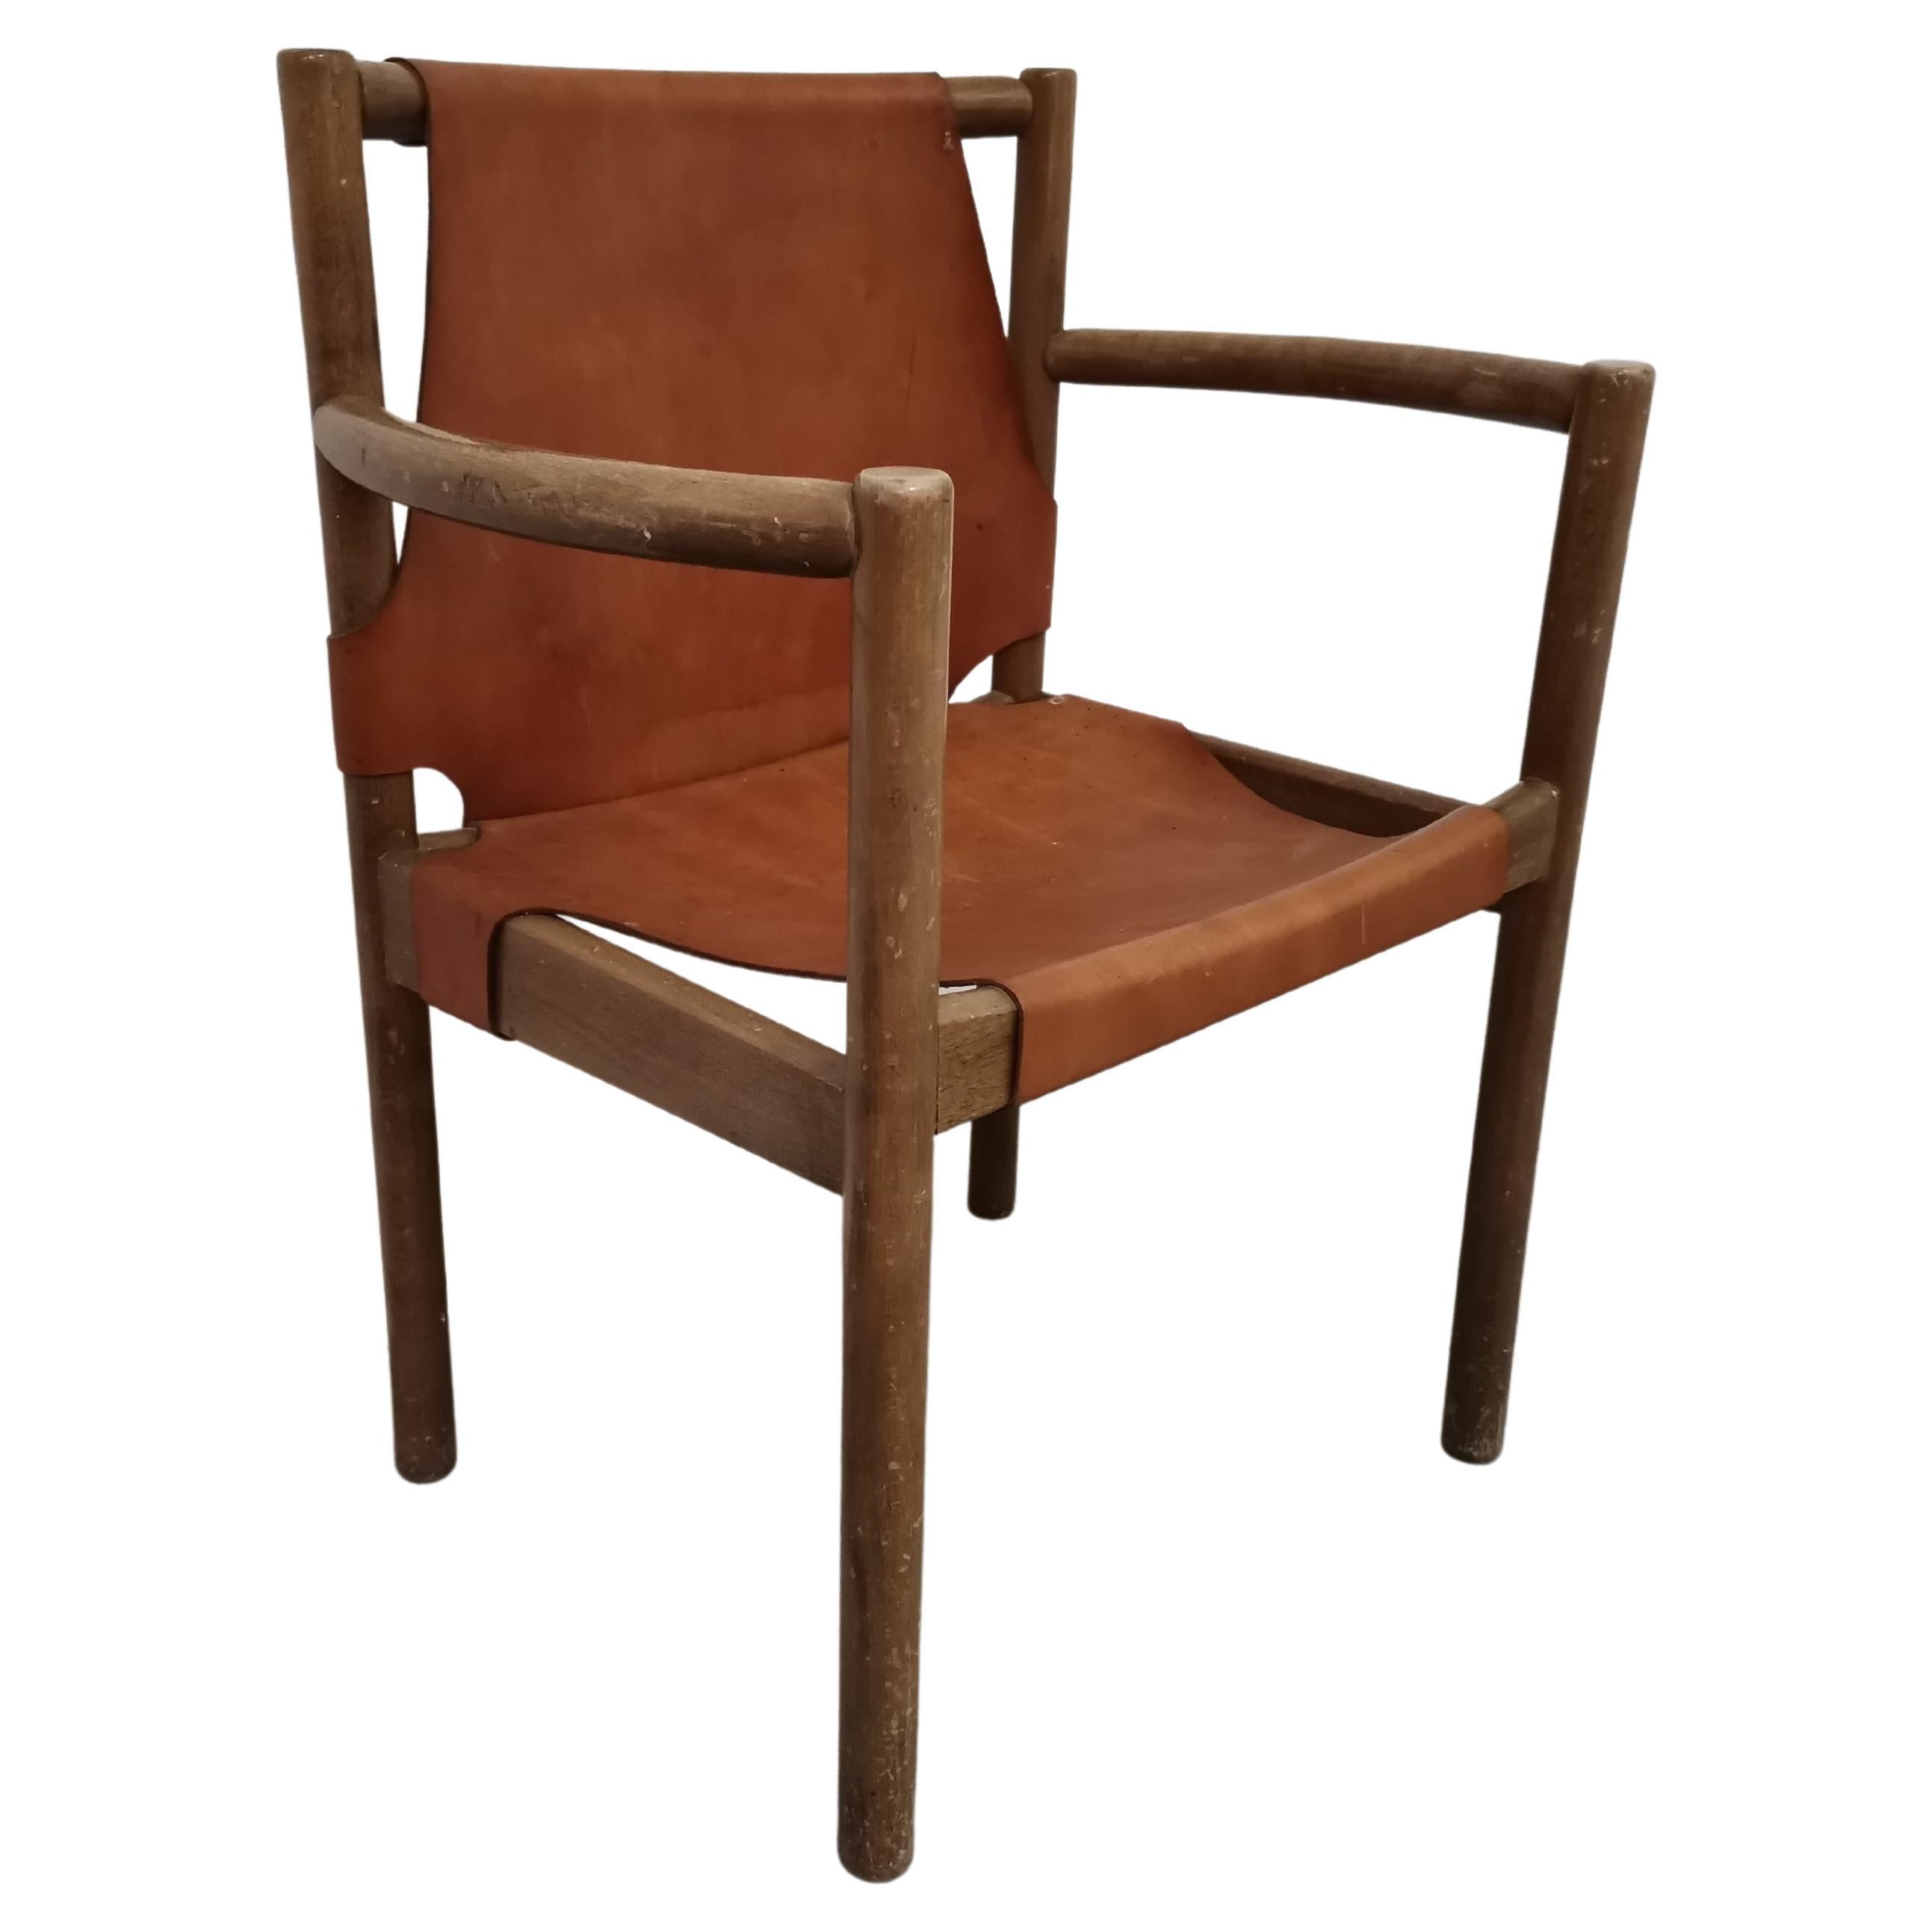 Chair, 1960s